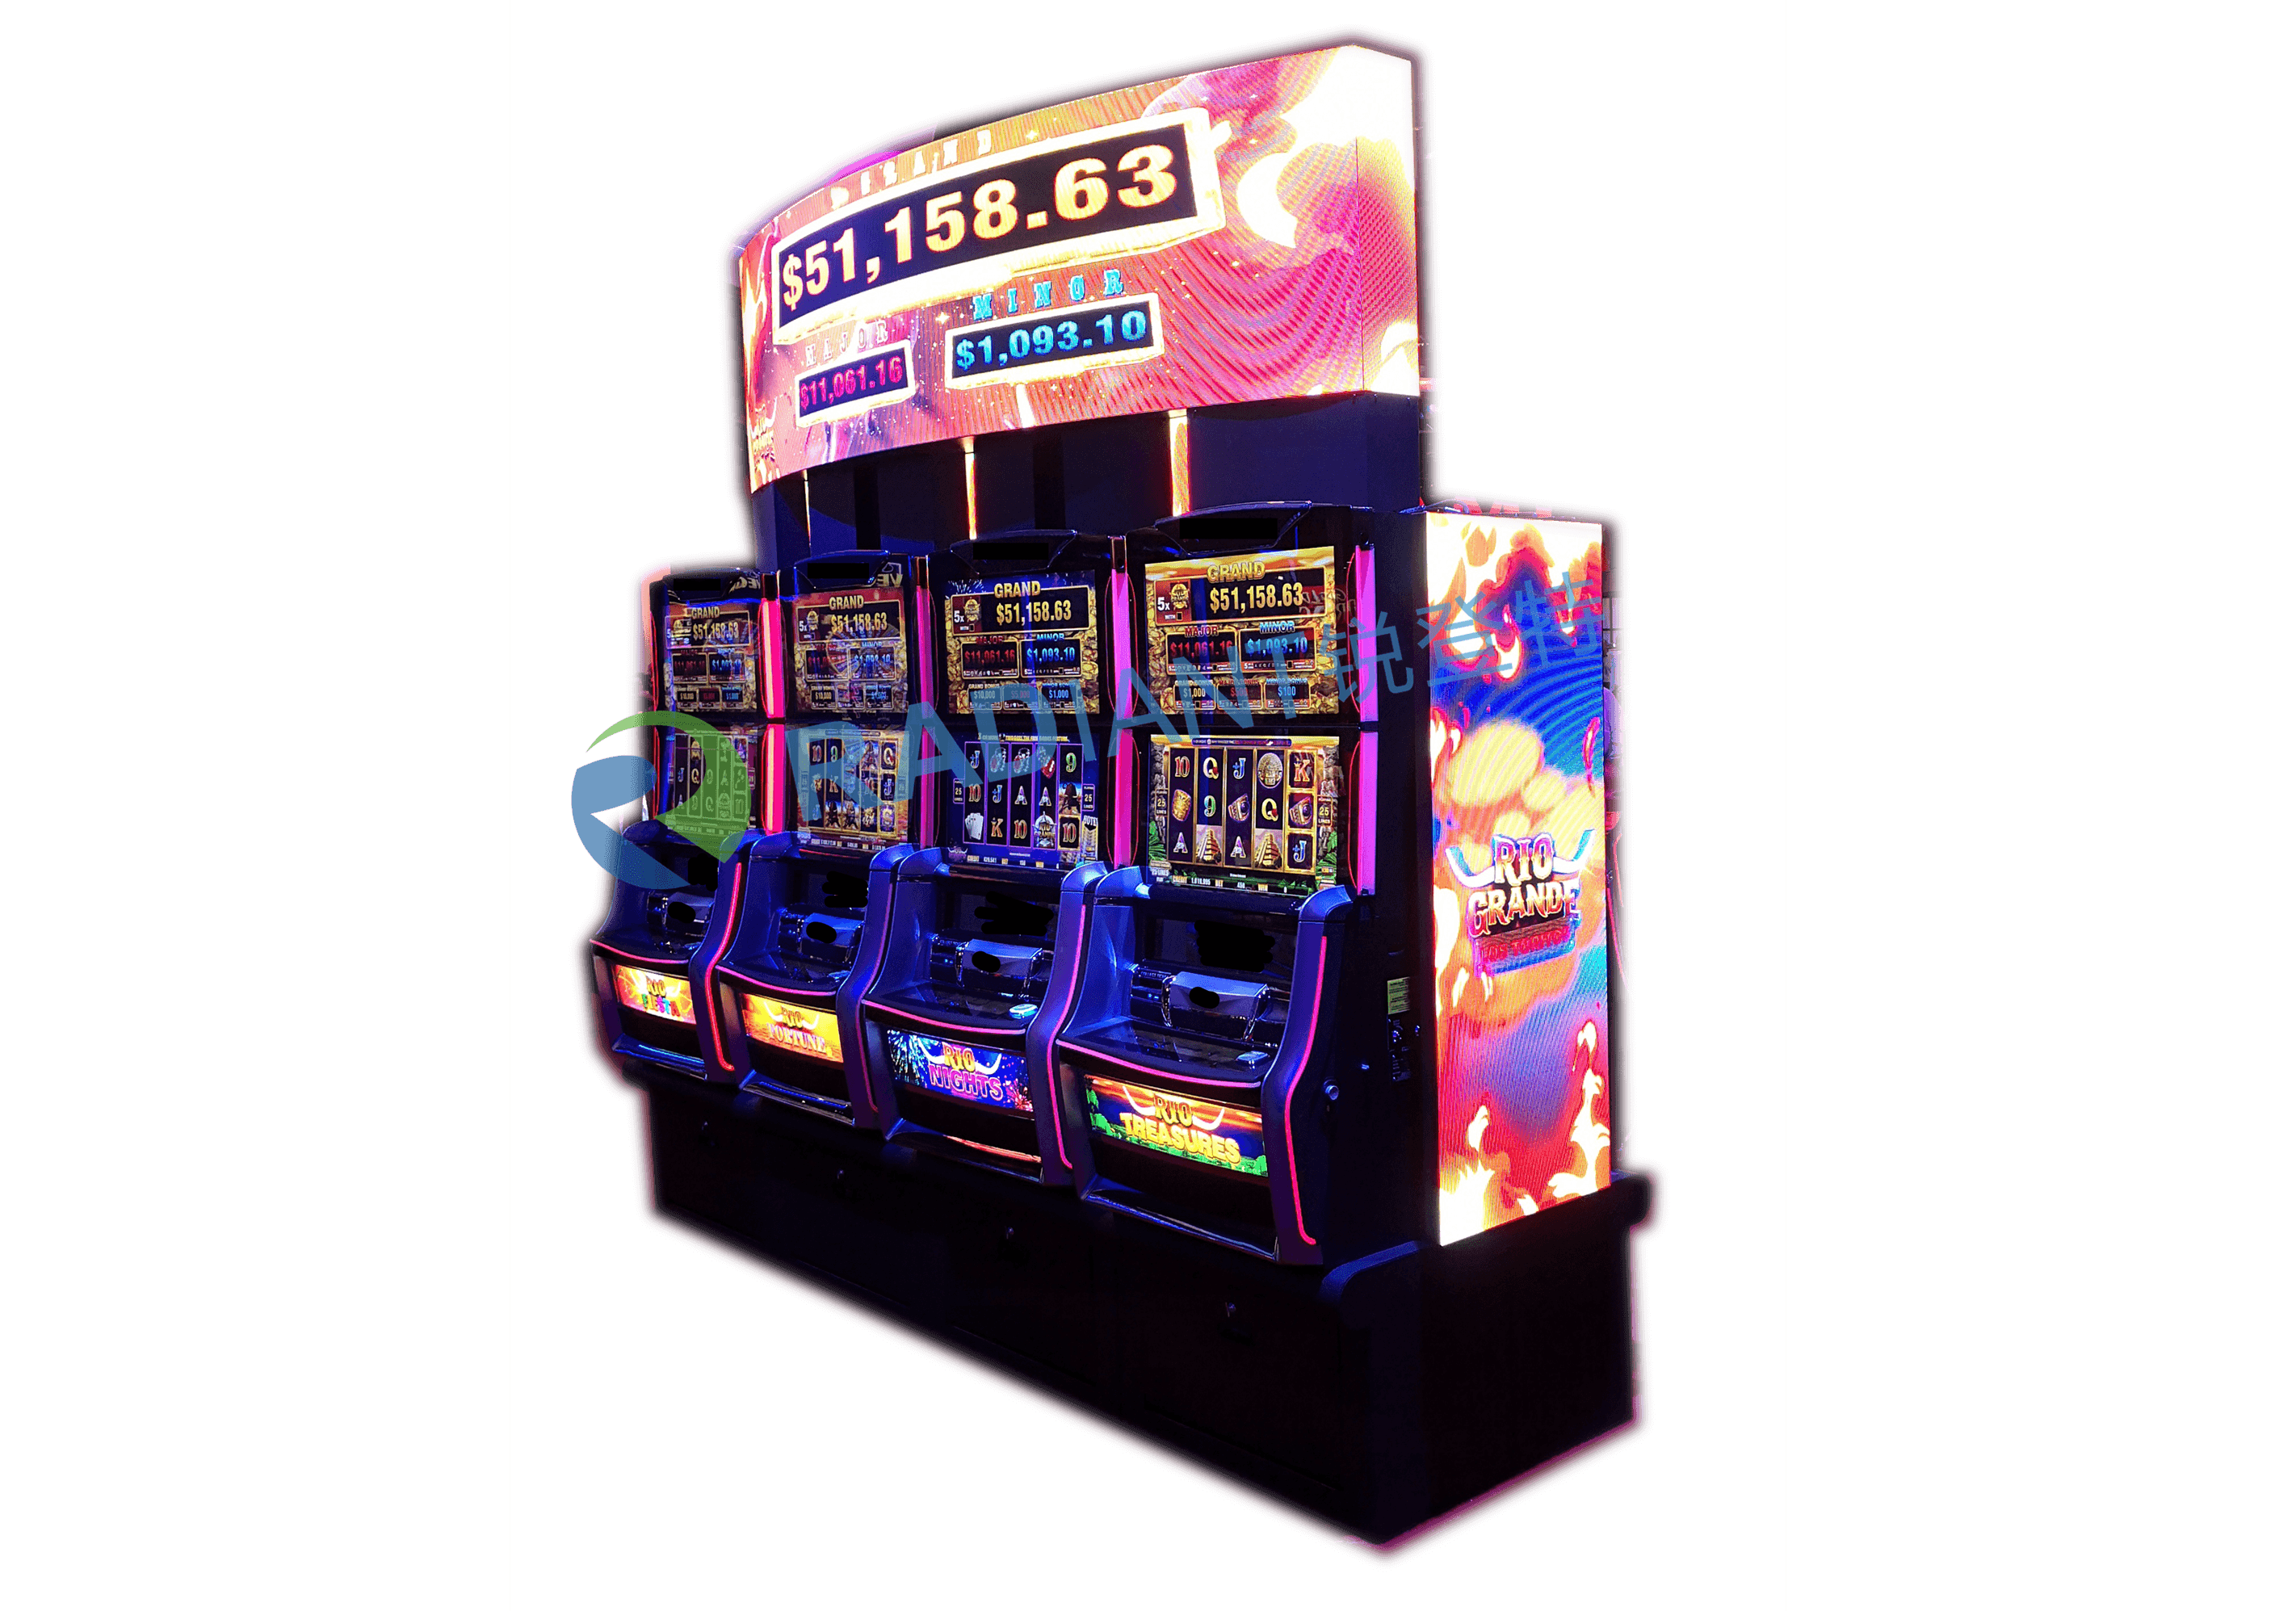 Ellipse LED Display for Slot Machine; Gaming led sign in Casino; Gambling facilities